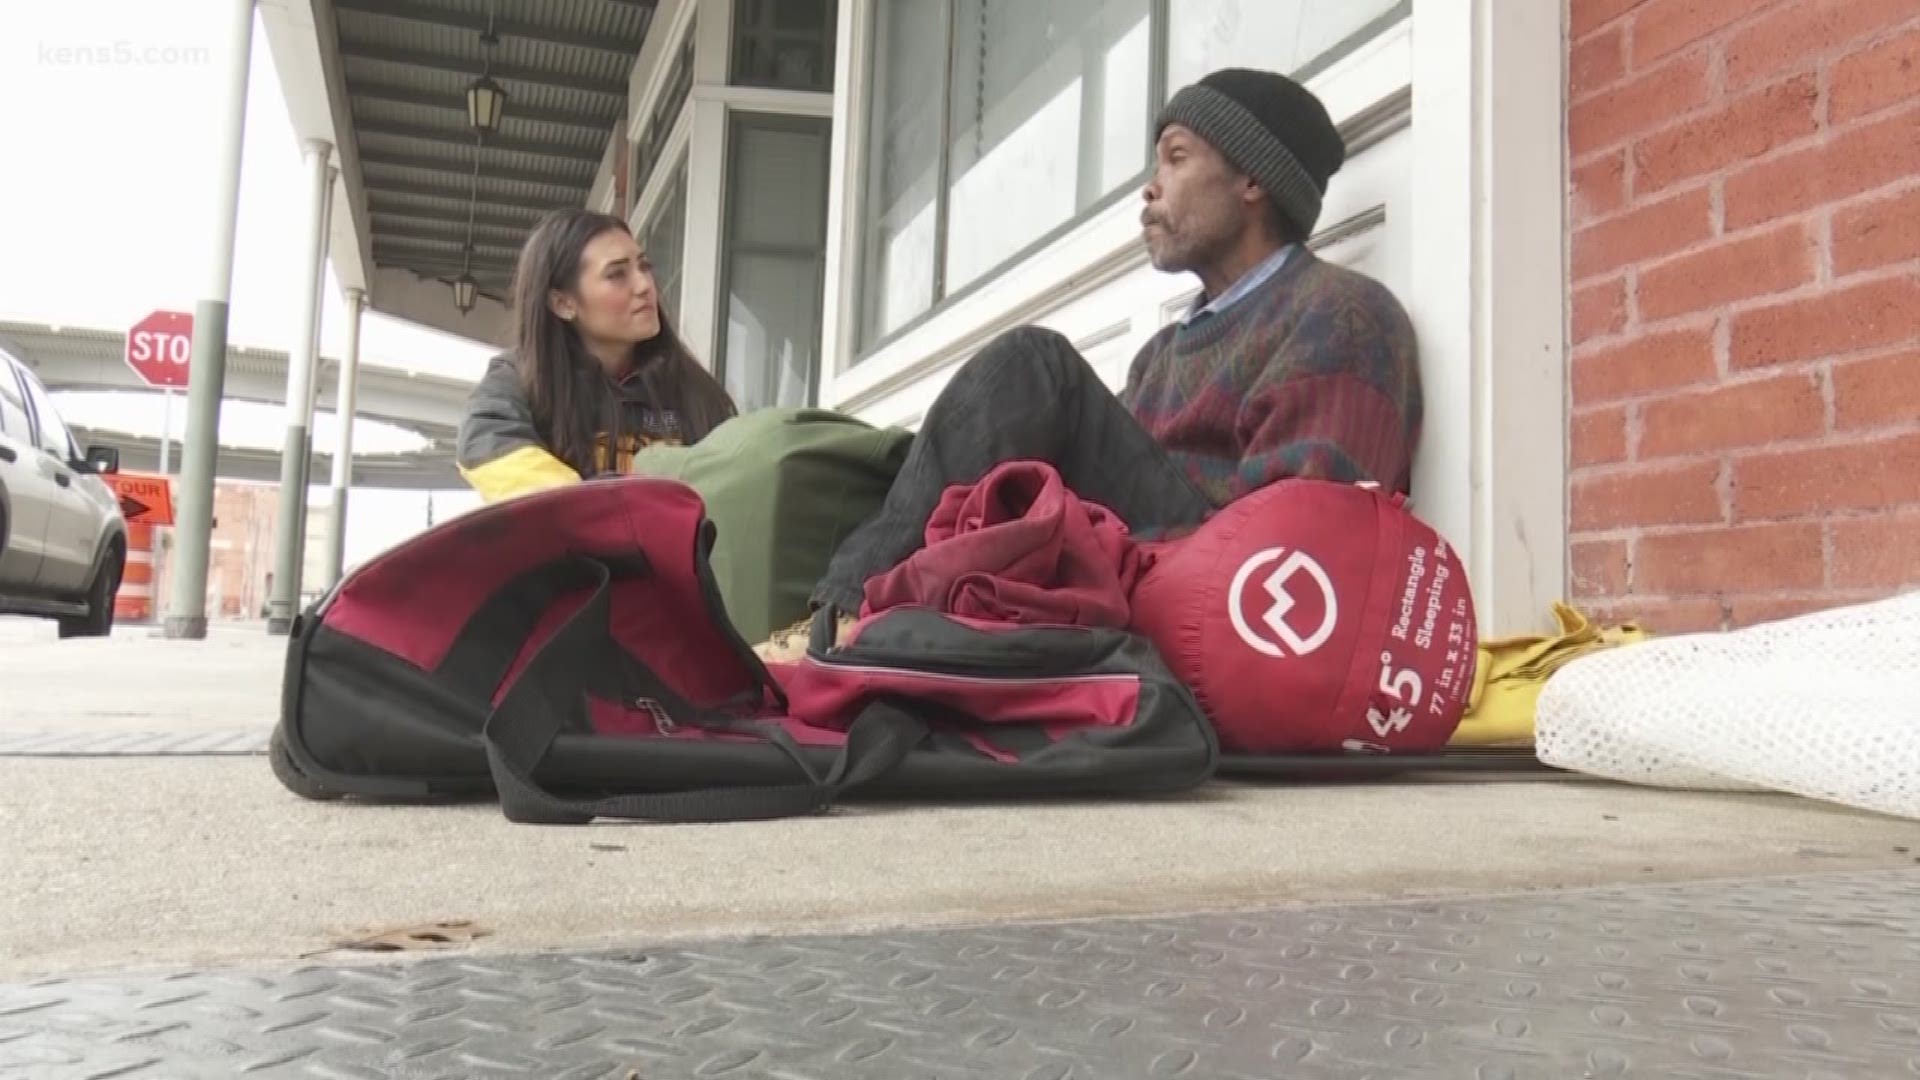 Quinten Gilmore is just one person who has struggled to escape homeless after putting his life on the line for his country. But he says others need more help than him.